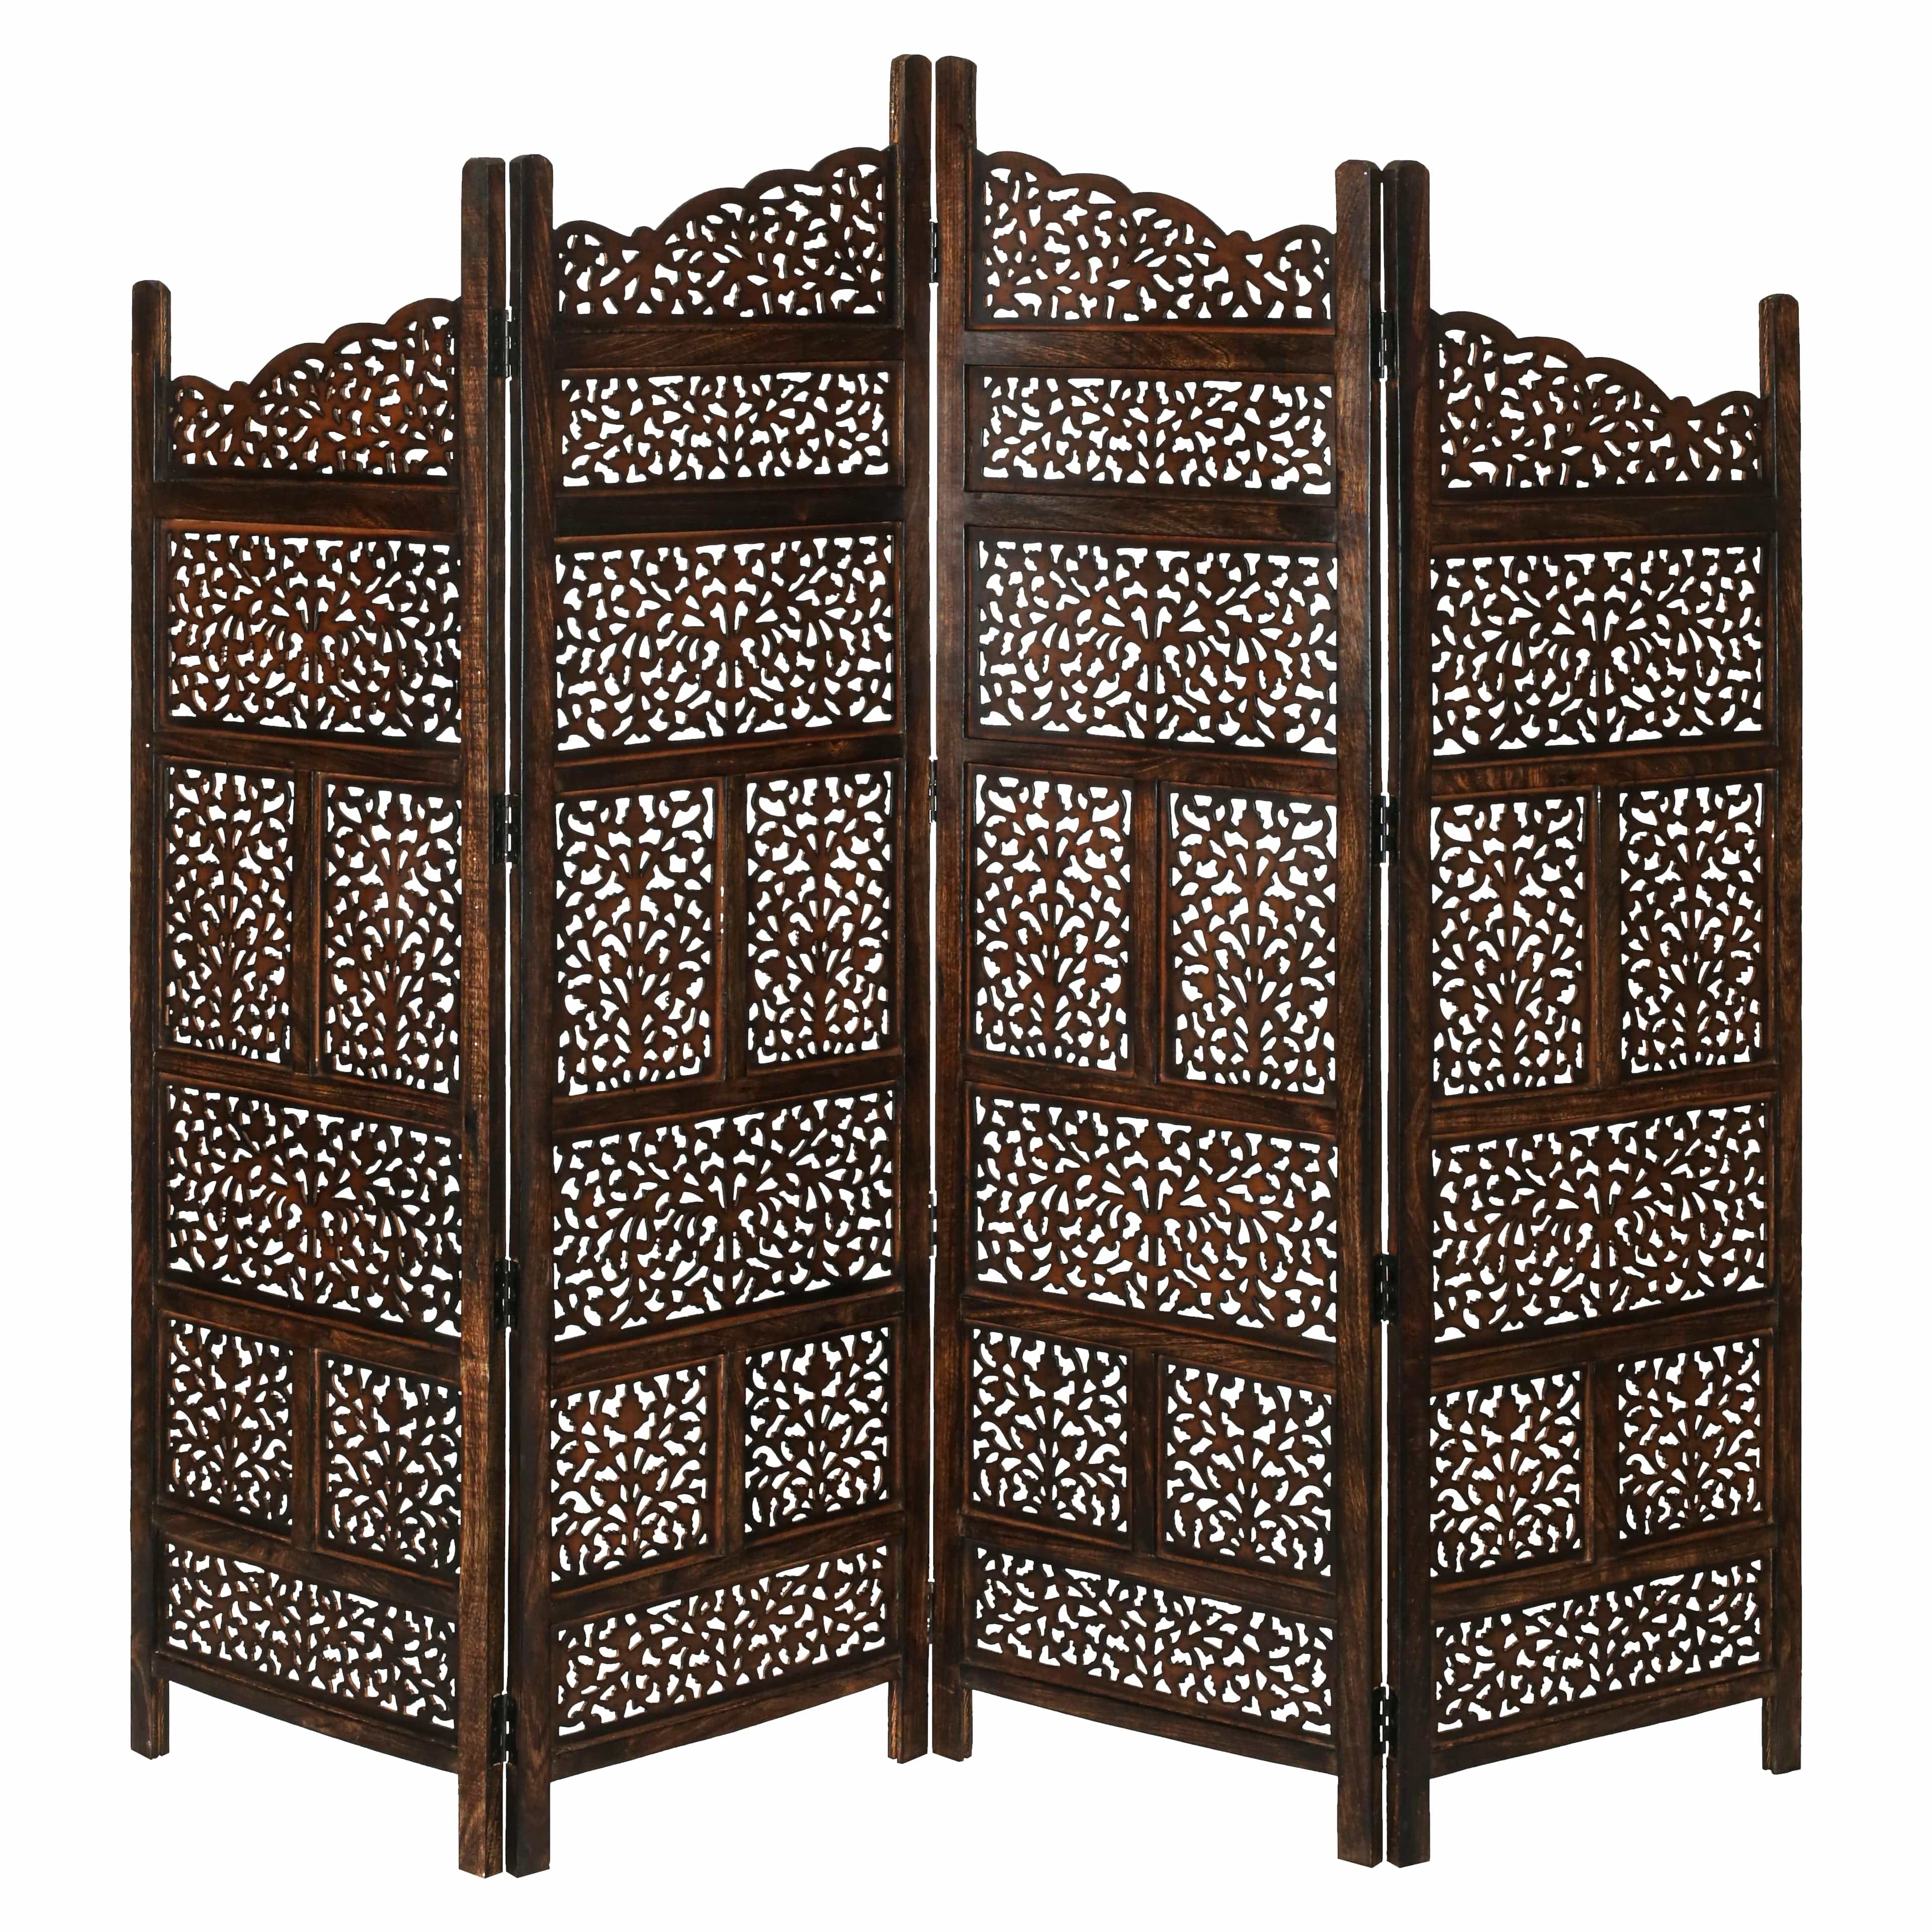 Stylish Burnt Wood Room Divider: Privacy Screen with Shoji Design